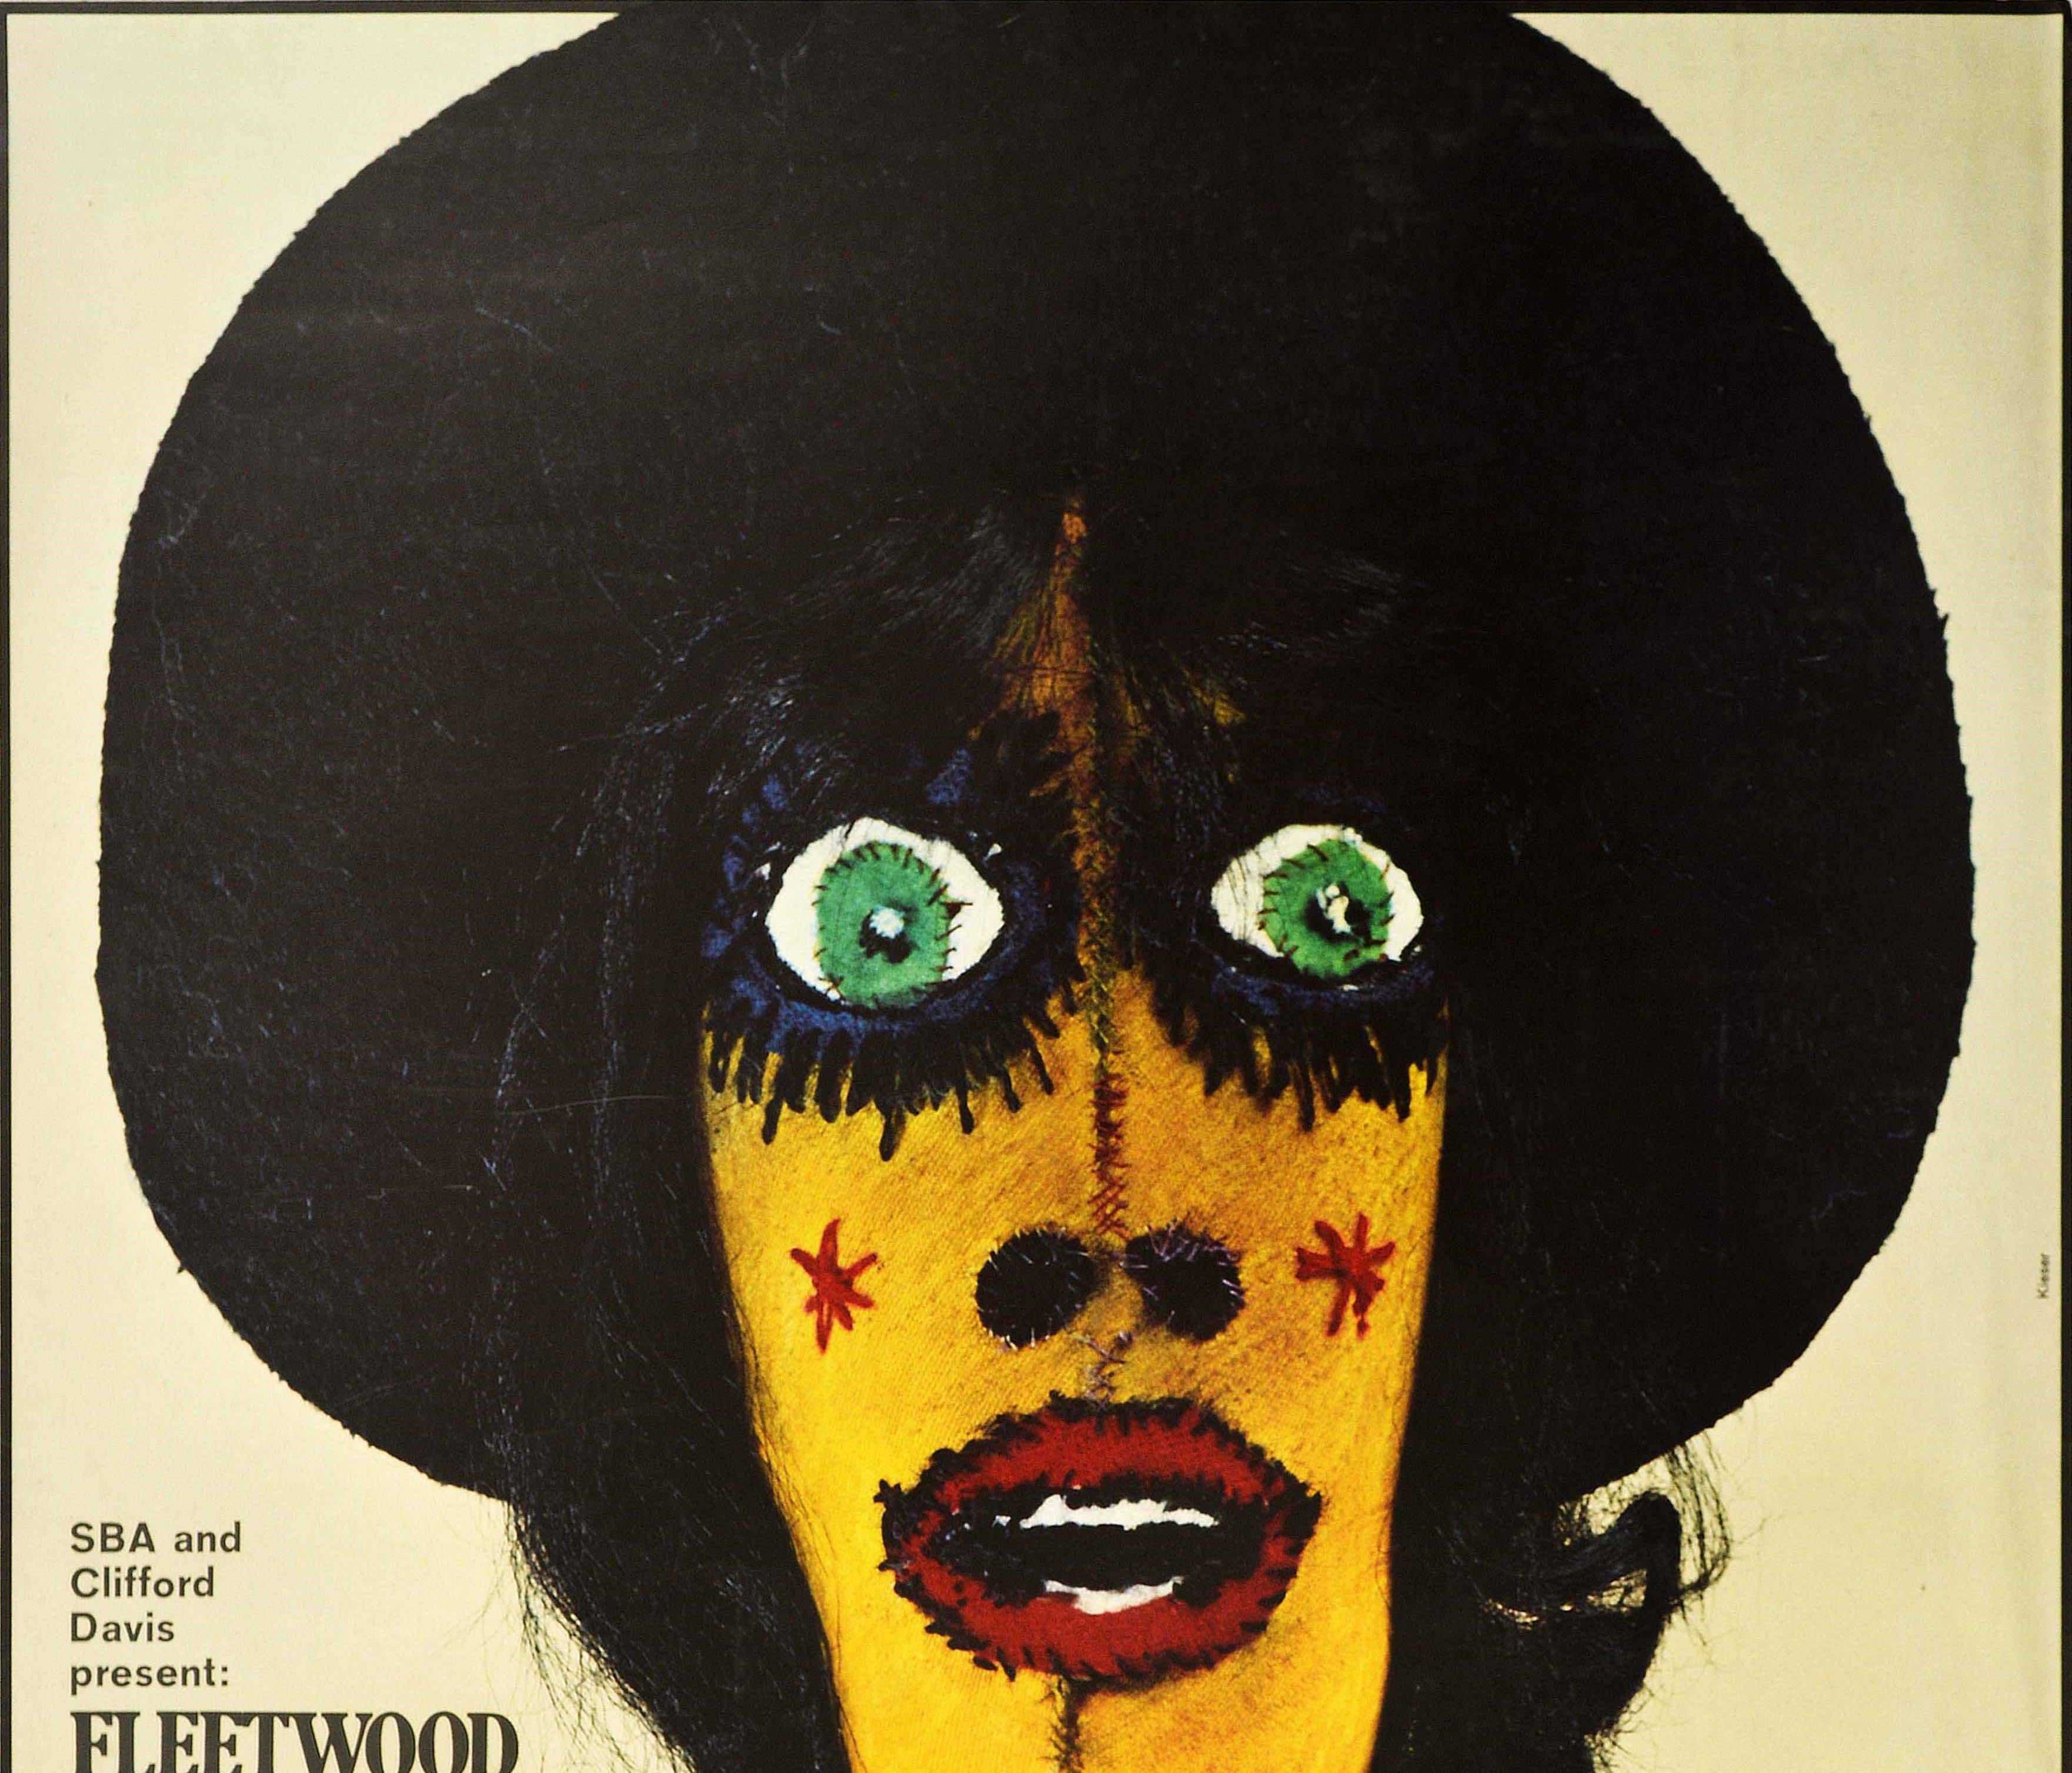 Original vintage music advertising poster for SBA and Clifford Davis present: Fleetwood Mac in Concert featuring a colourful patchwork doll style design by Gunther Kieser (b. 1930). The successful blues and rock band Fleetwood Mac was formed in